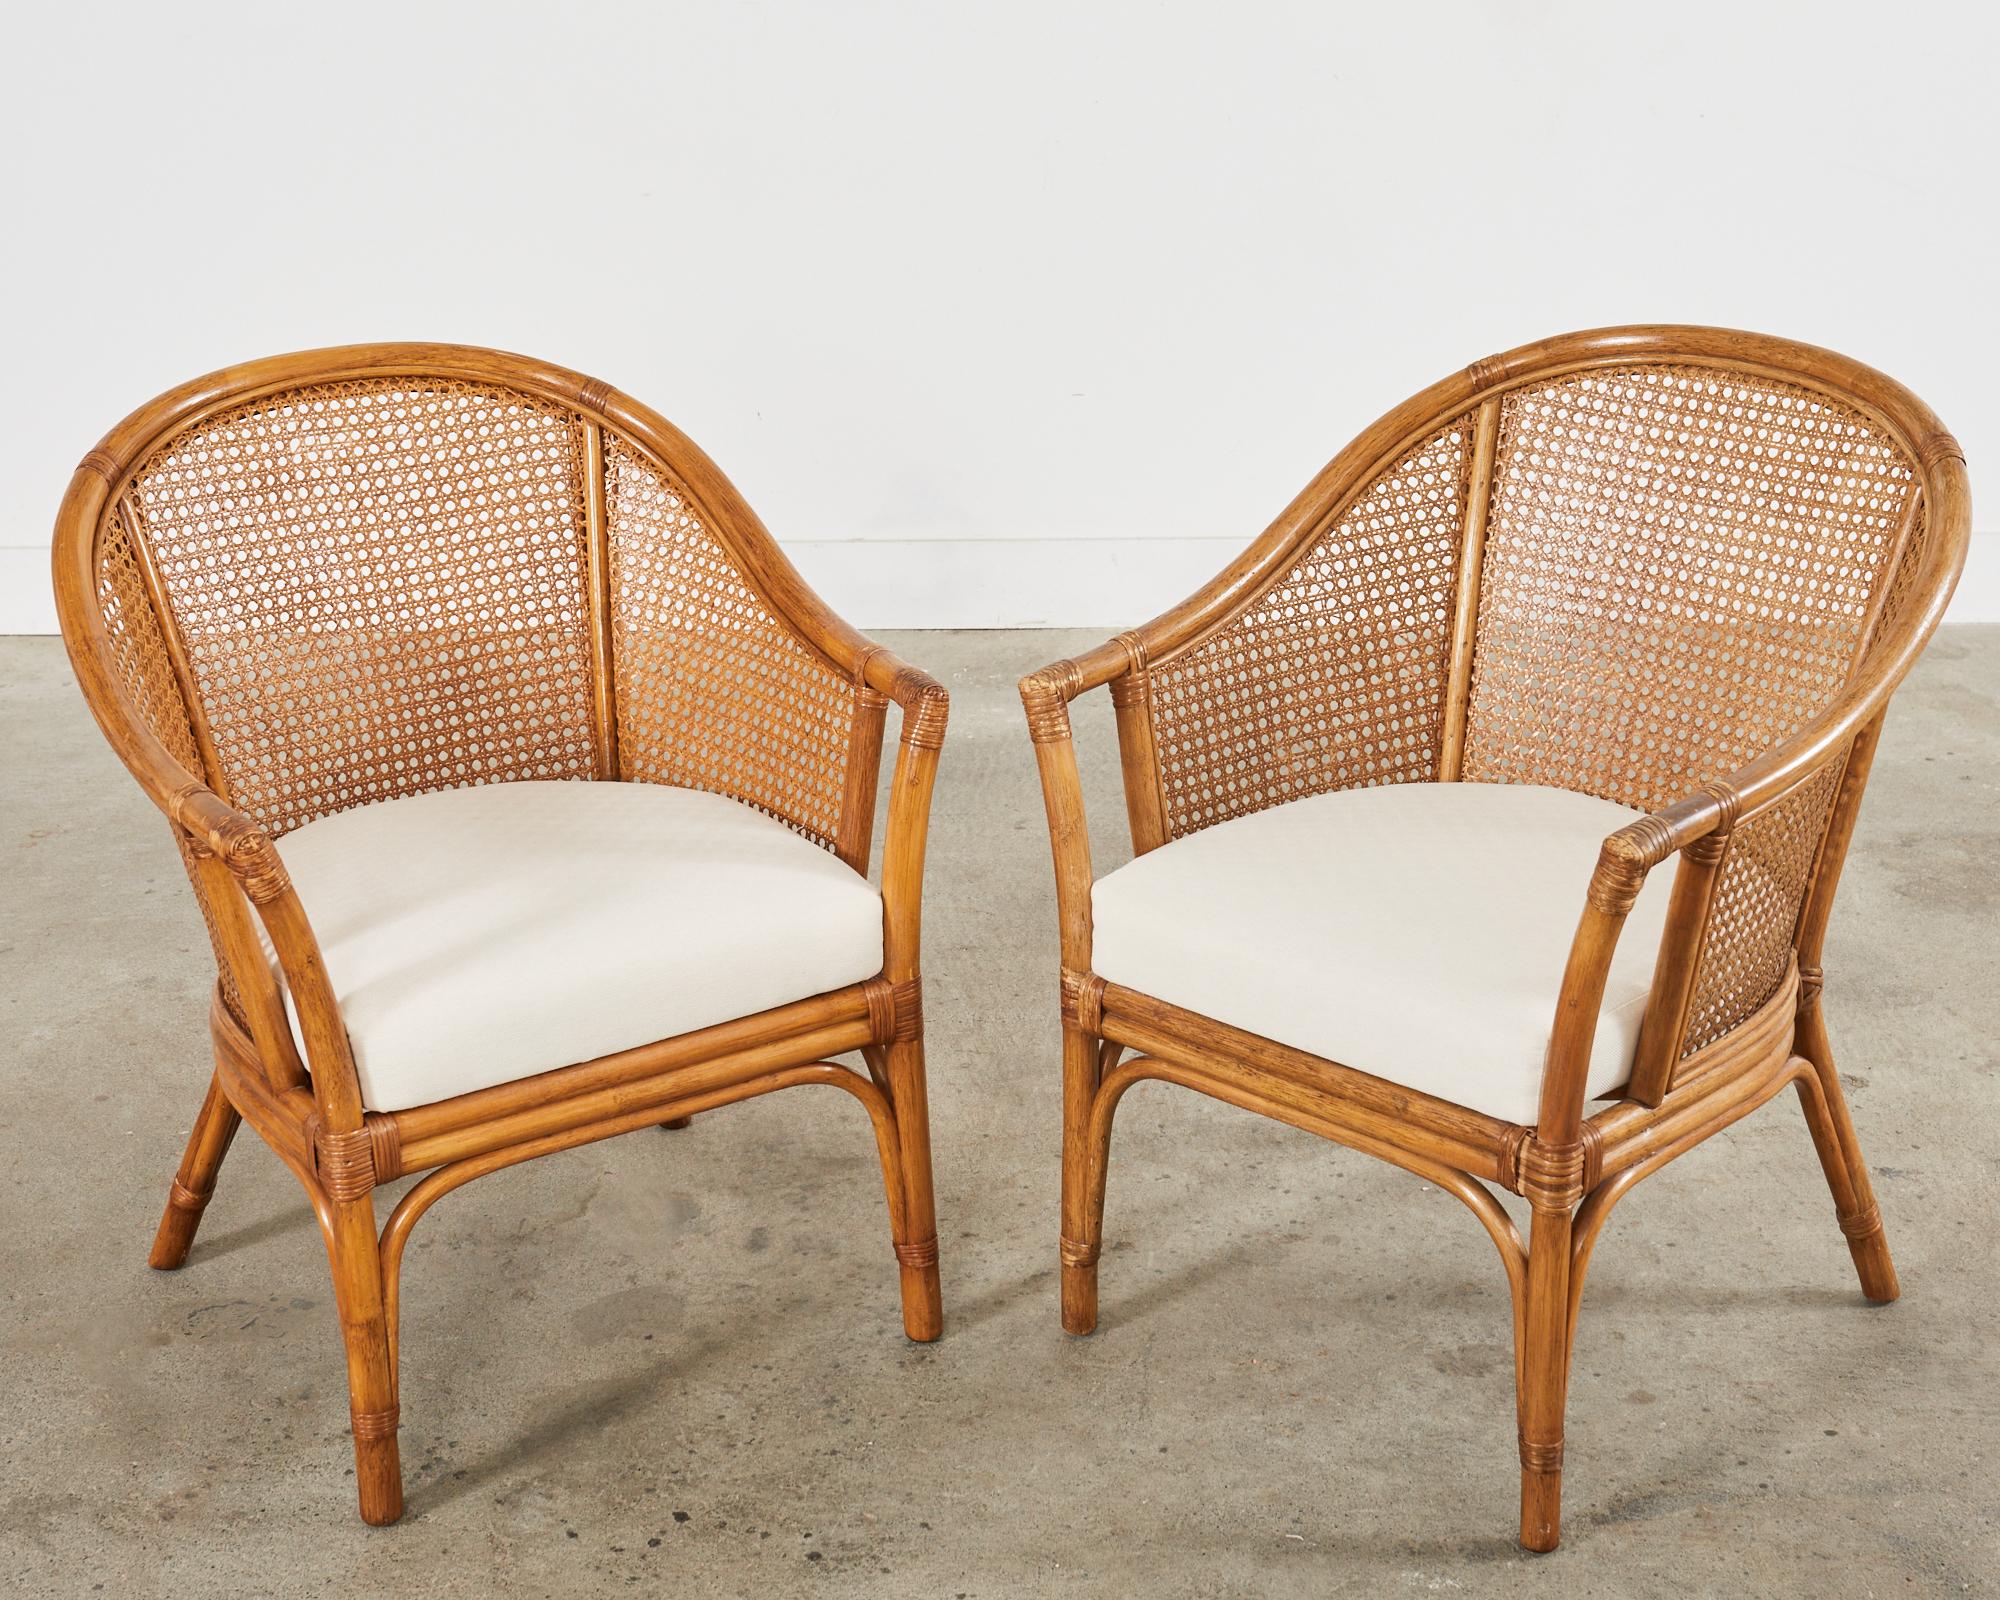 Pair of McGuire Style Rattan Cane Barrel Back Armchairs In Distressed Condition For Sale In Rio Vista, CA